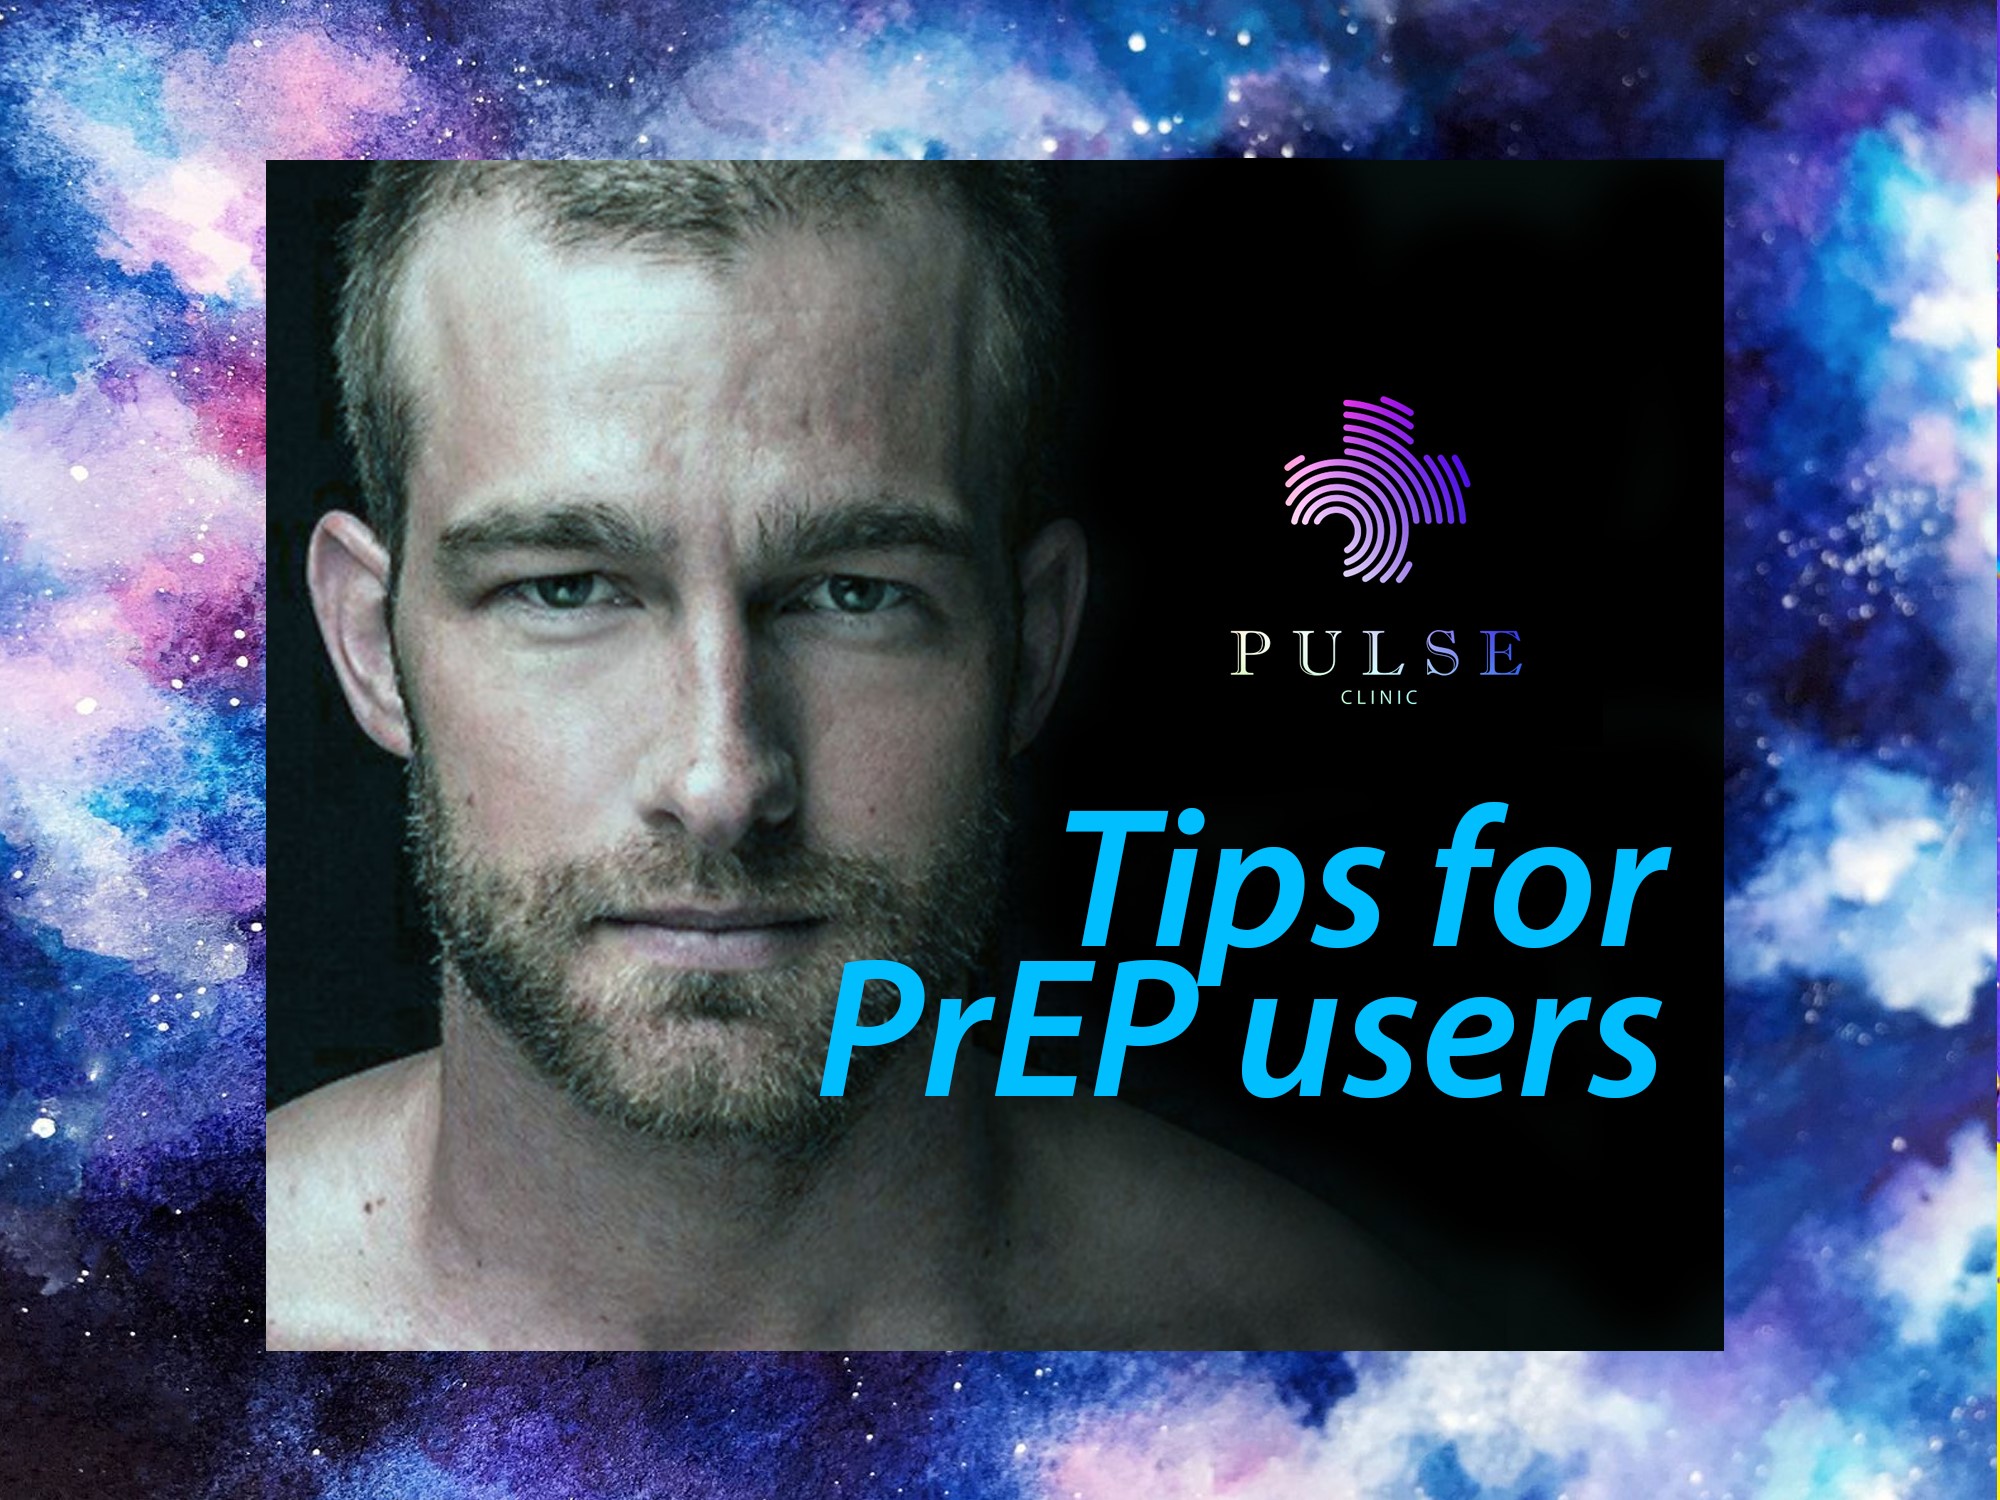 Tips for PrEP users - What else do you need to know about PrEP?